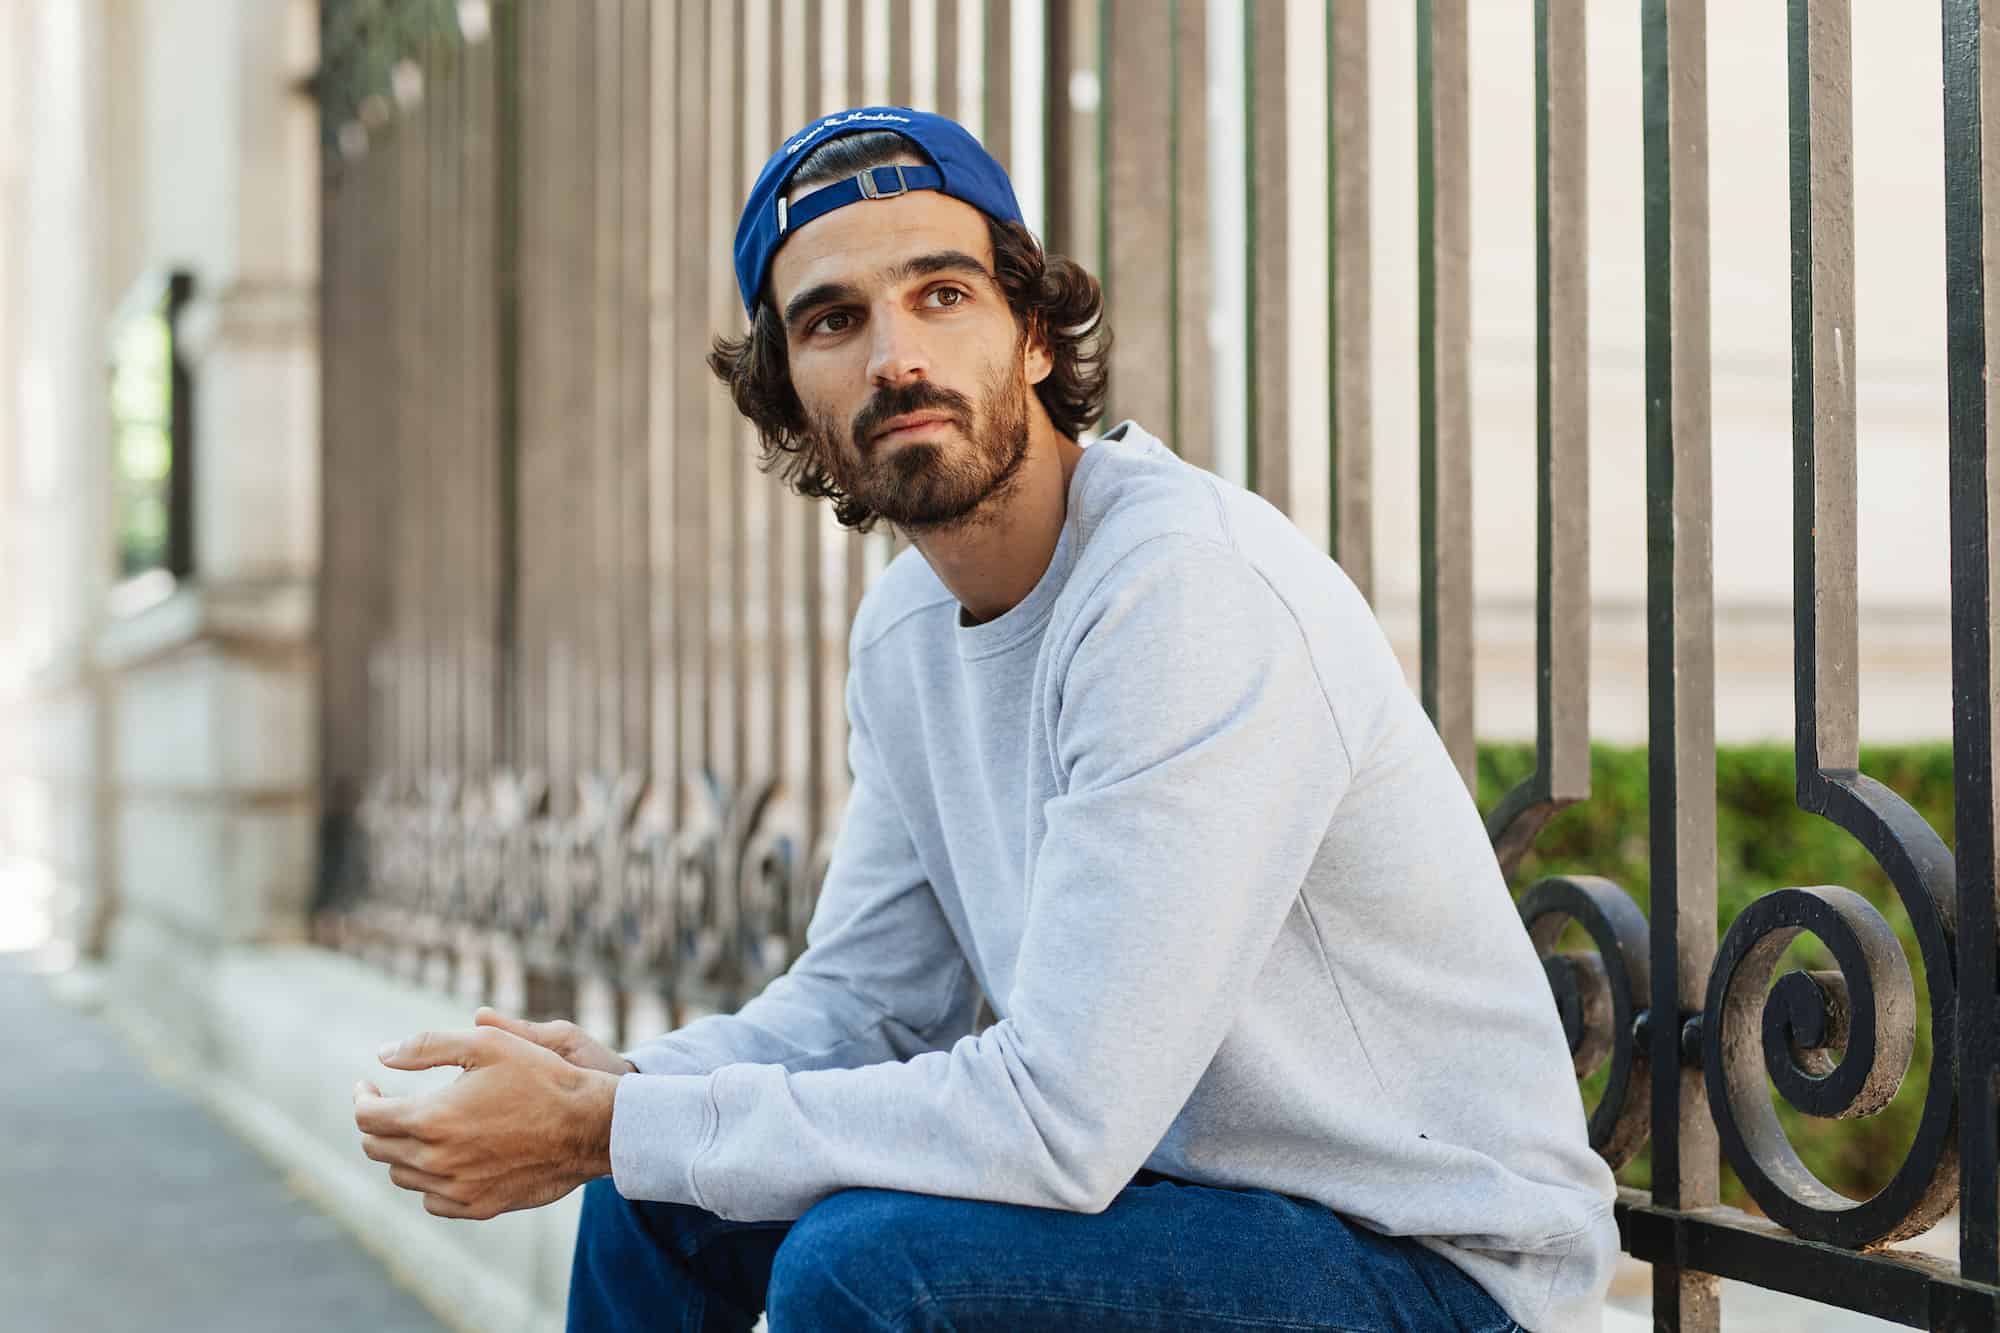 Sitting against an elegant wrought-iron gate, a model gazes off into the distance wearing a comfy grey sweatshirt by the ethical fashion brand forlife., and his wild brown curls are tamed by a deep blue baseball cap worn backwards.